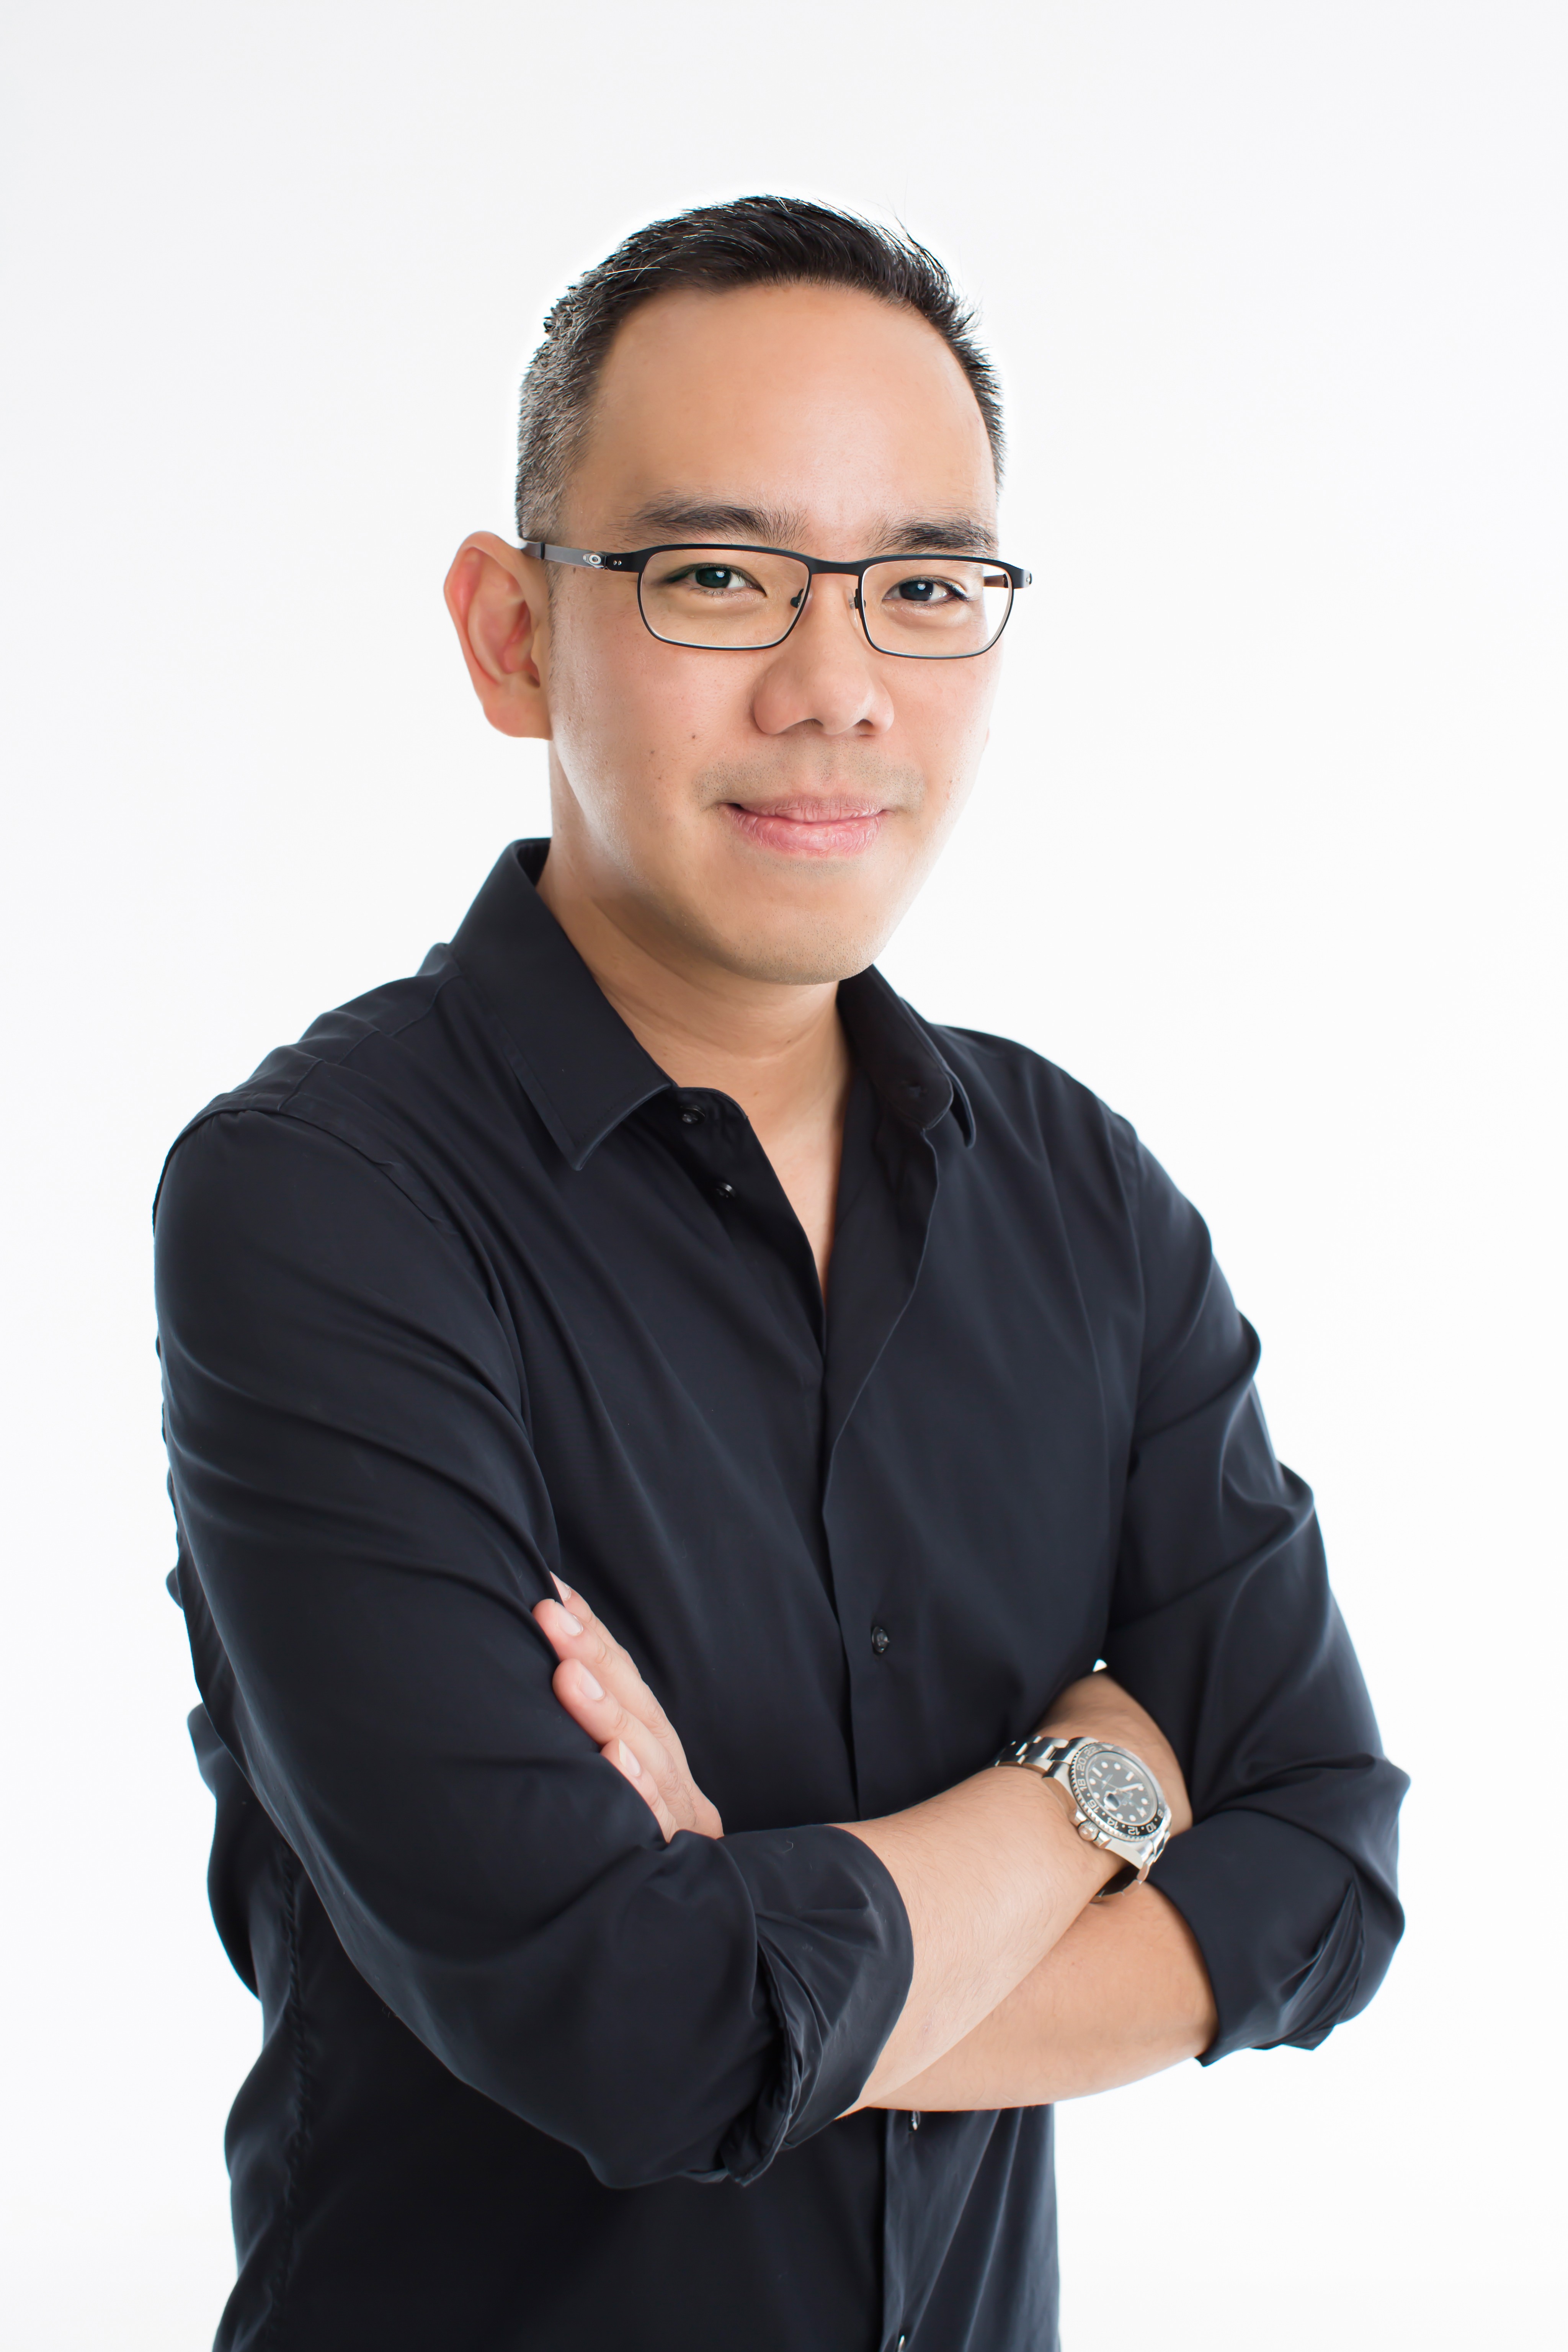 Calvin Lim, president and CEO